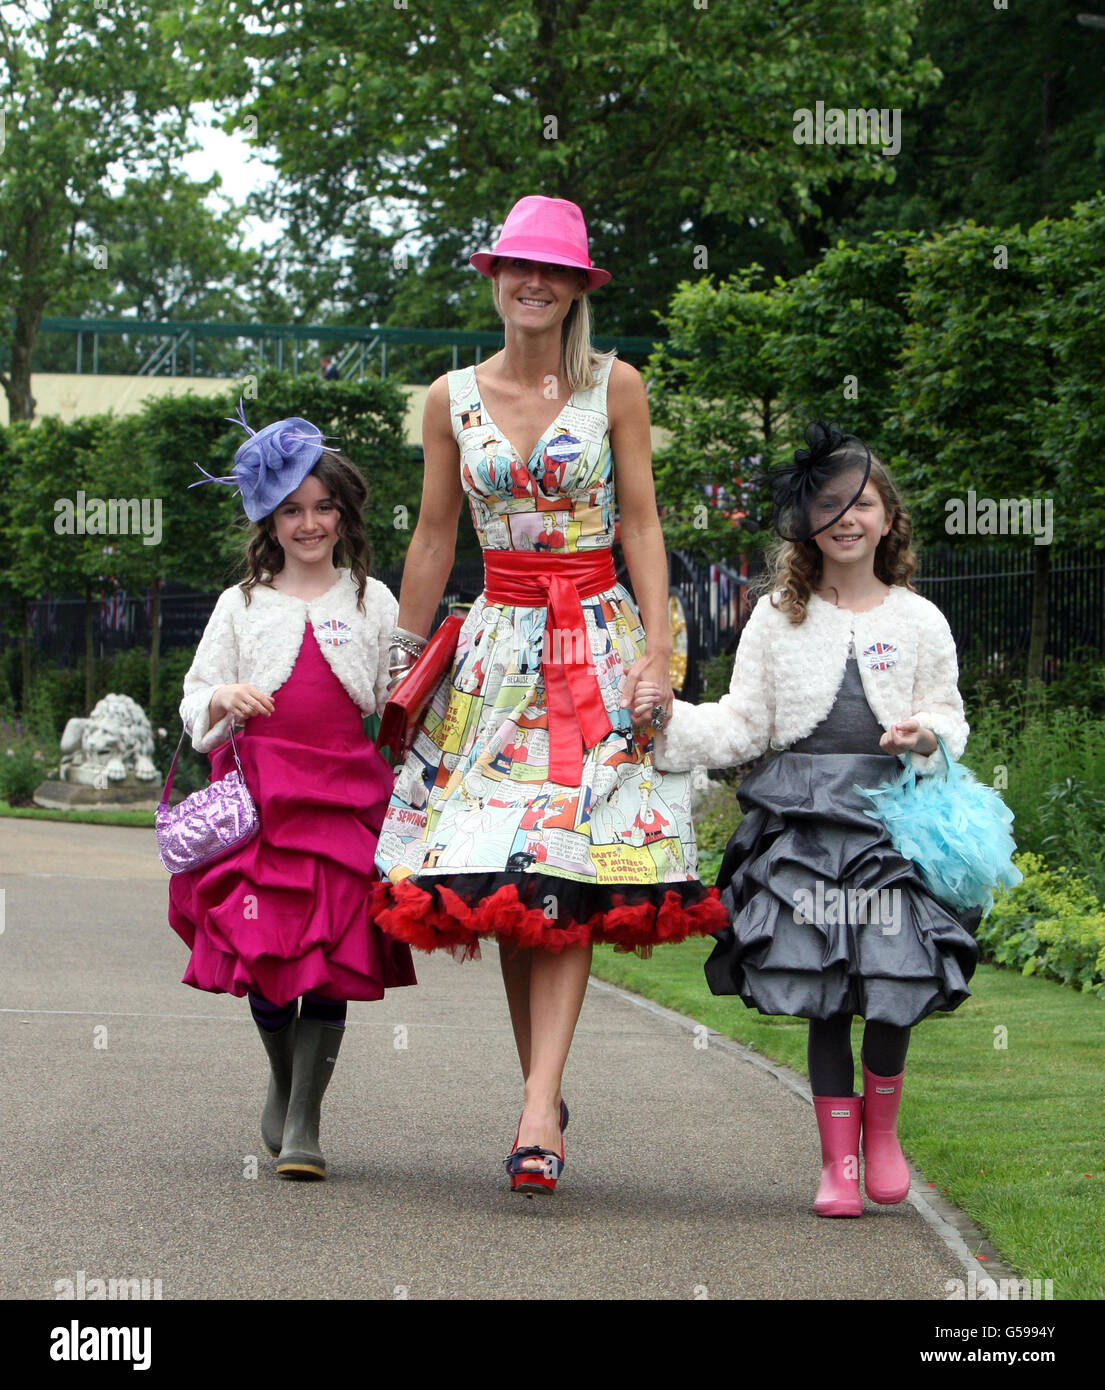 Elizabeth Blake-Thomas from Richmond walks with her Daughters Isabella and Cassandra aged (9) during day four of the 2012 Royal Ascot meeting at Ascot Racecourse, Berkshire. Stock Photo